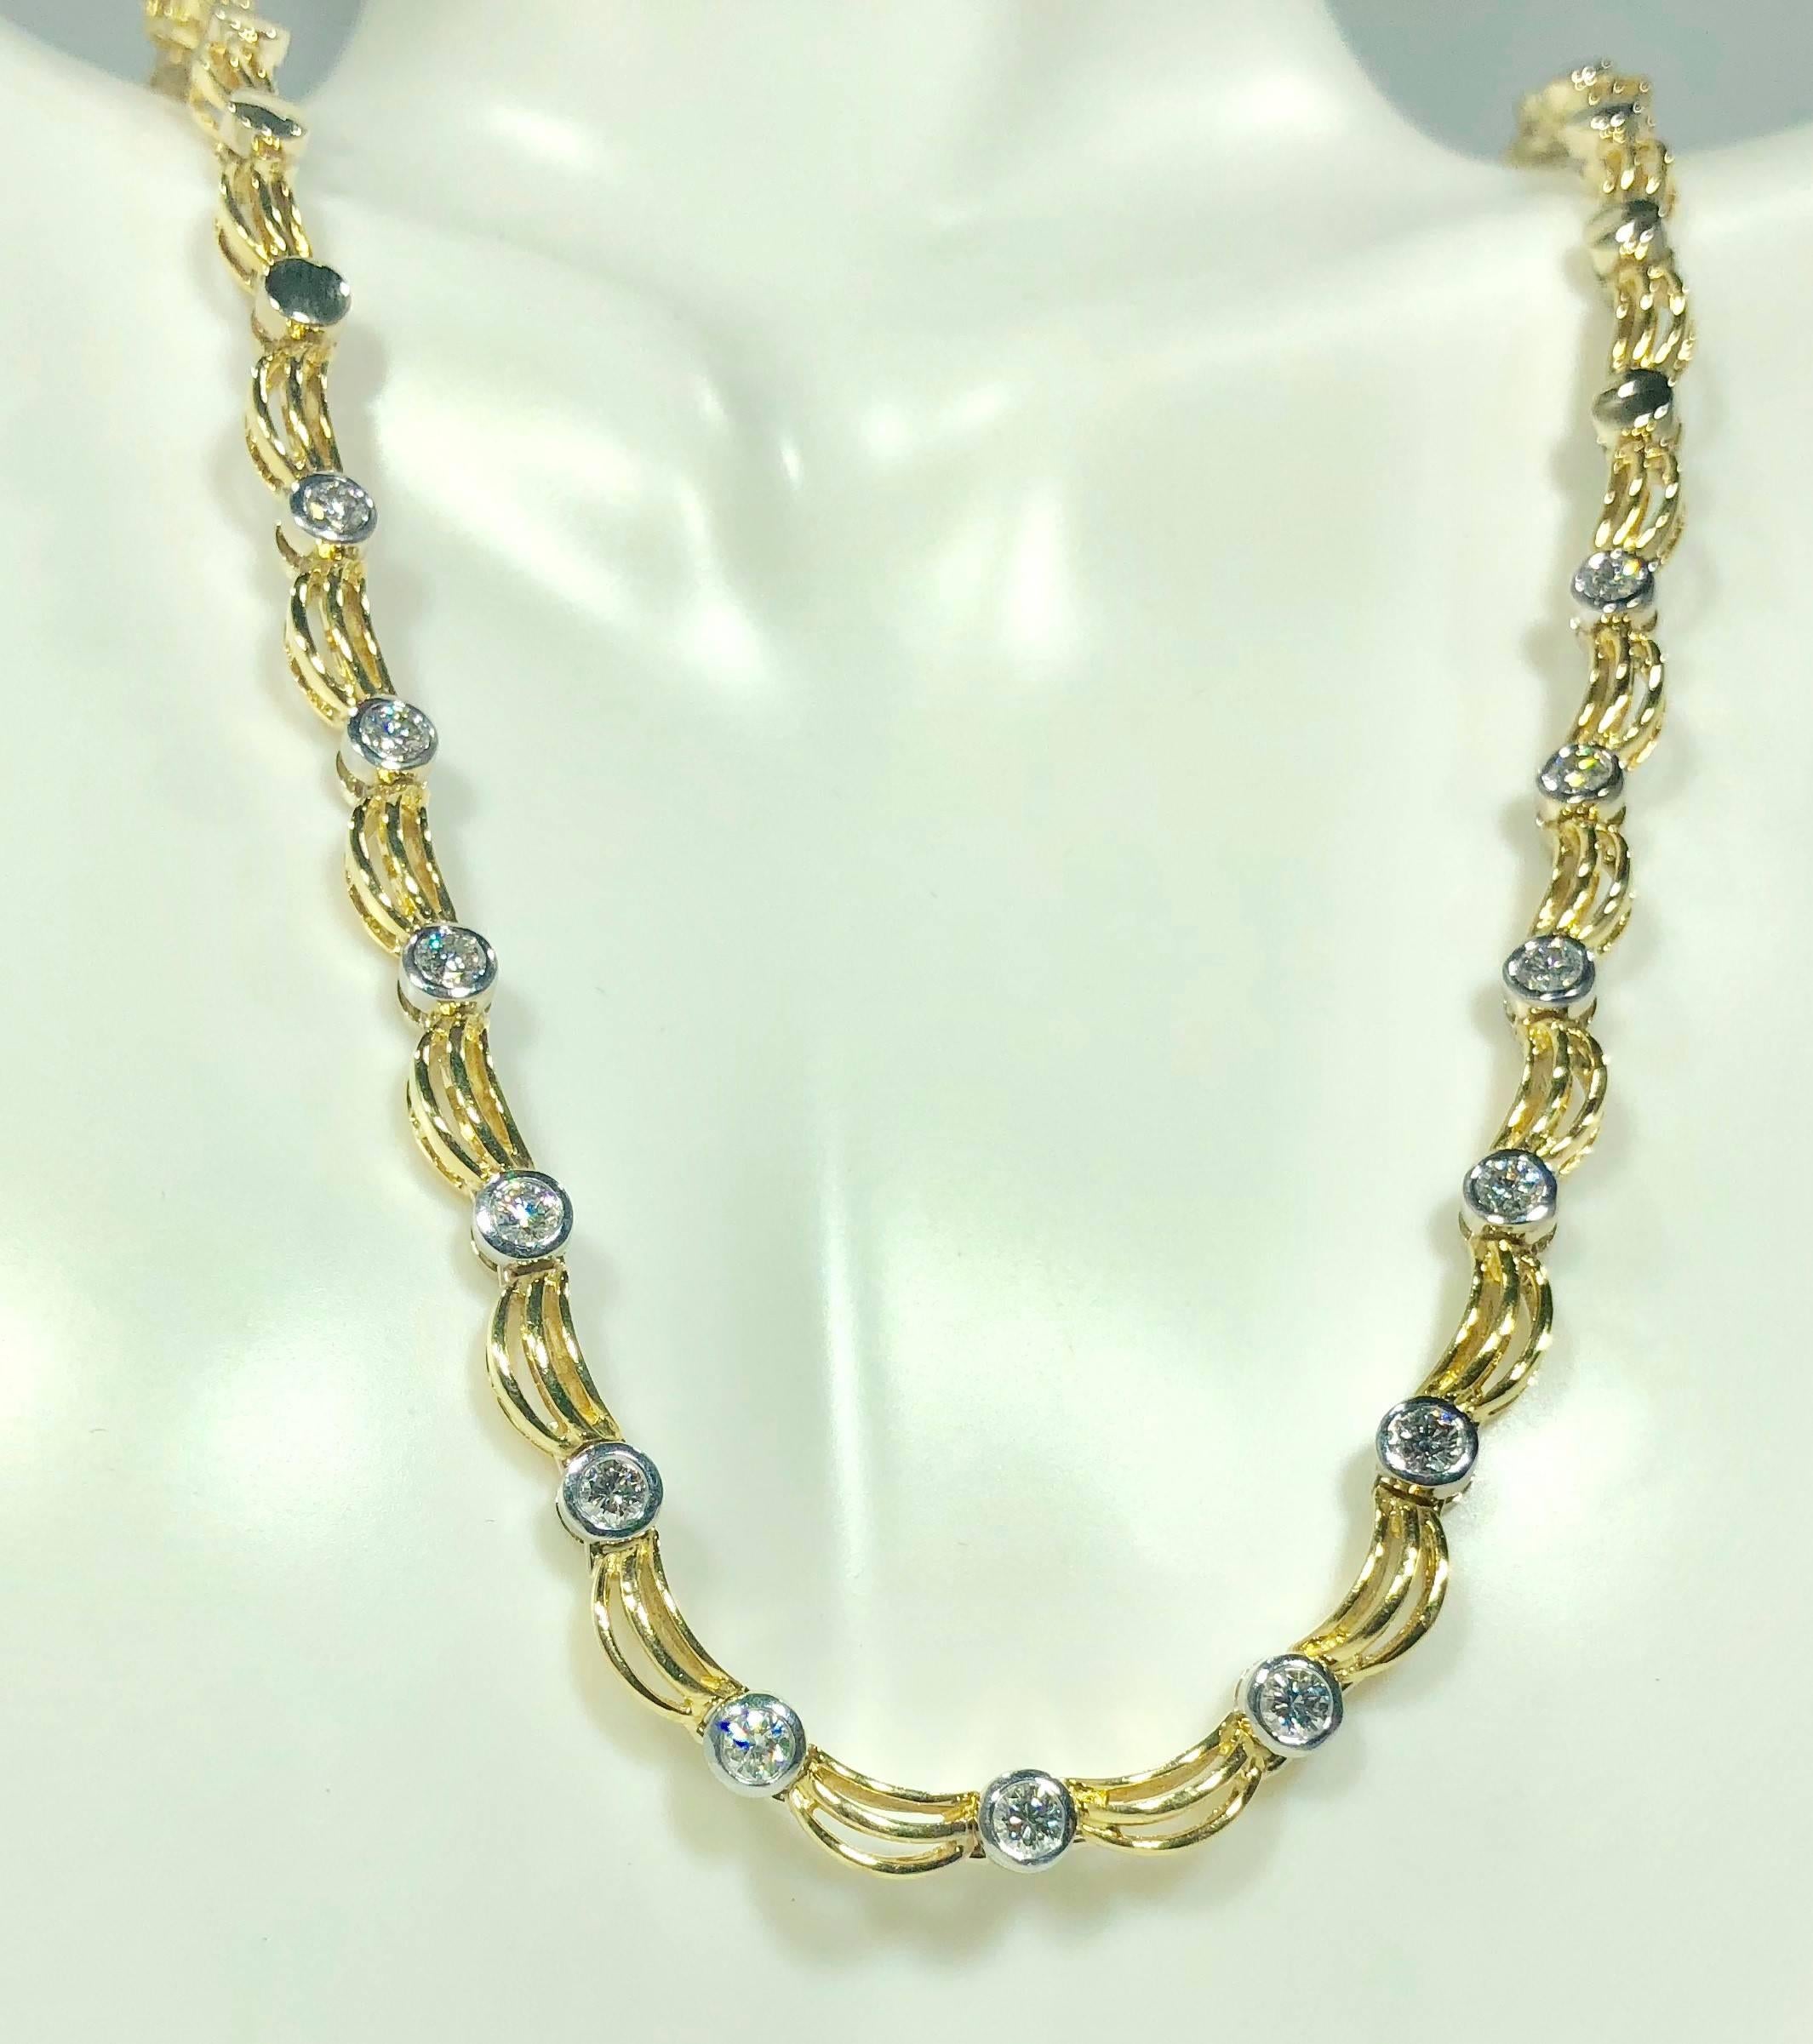 Modern 18 Karat Two-Tone Yellow/ White Gold and 1.0 Carat Diamond Fancy Link Necklace